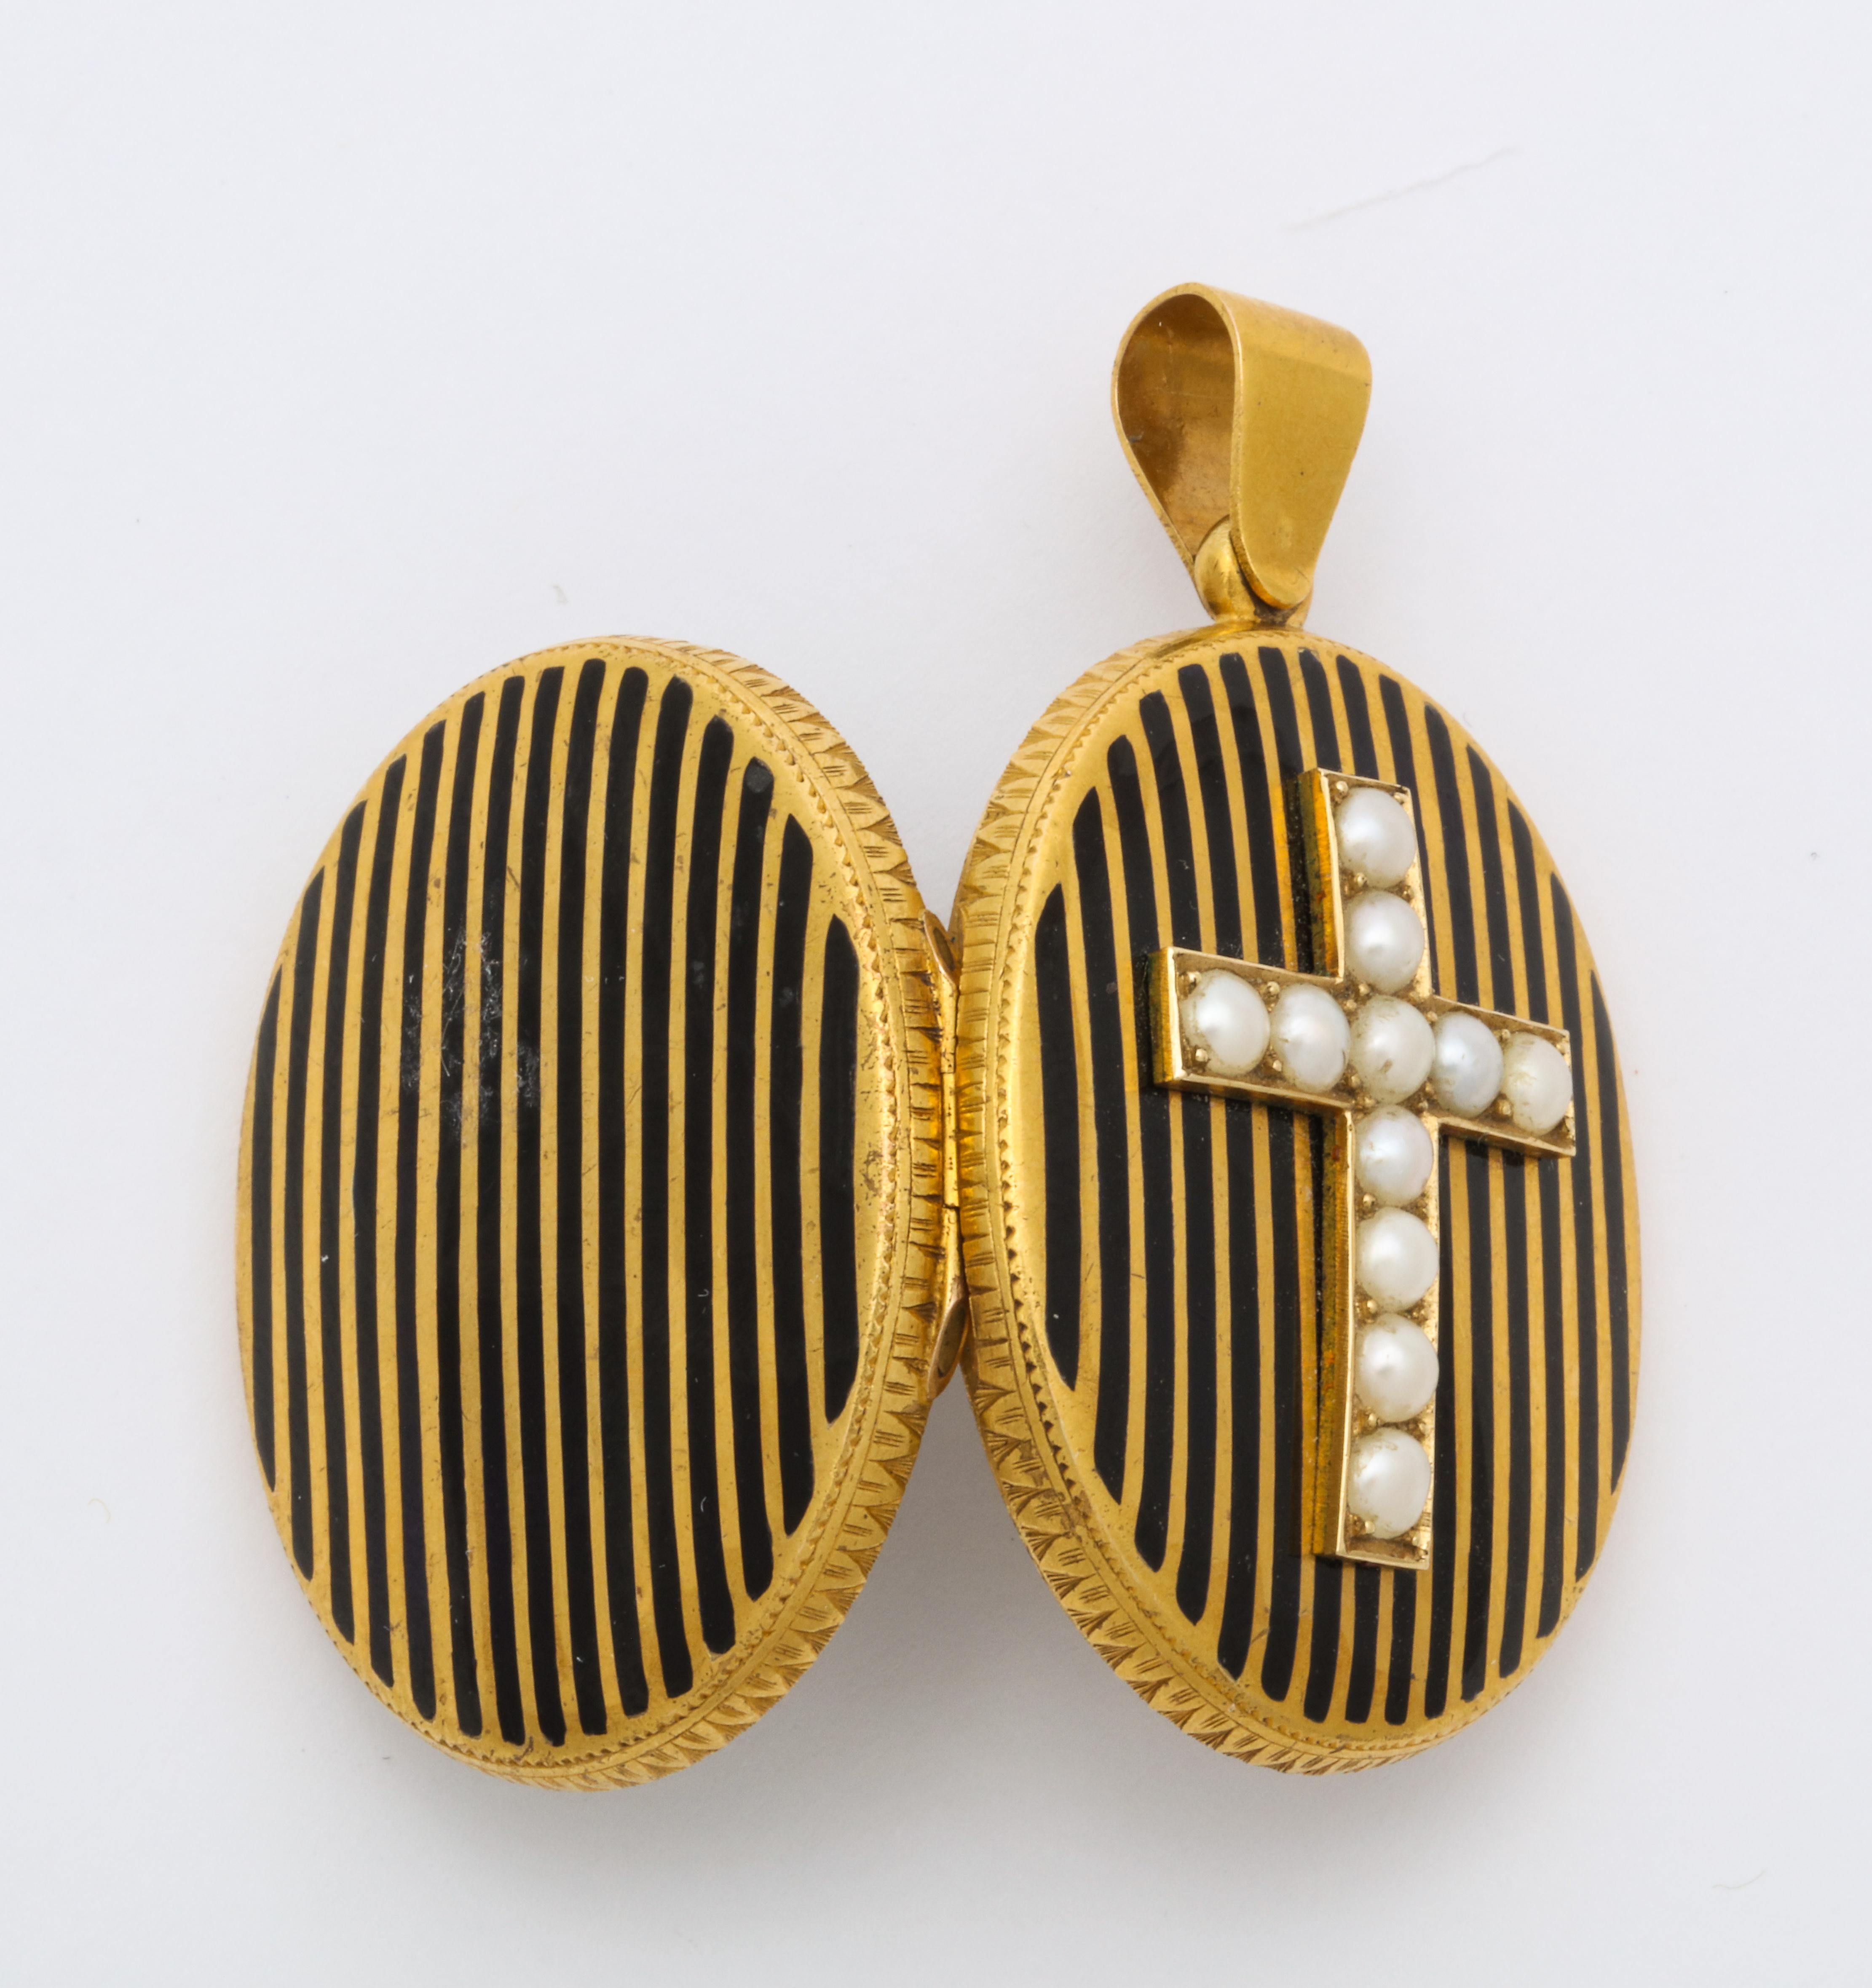 Midpoint on this 18 kt oval locket, set above vertical black enamel stripes, is a cross of radiant natural pearls. The pearls are perfectly matched with no loss to the nacre, the pearlescent layer on the top of the bead. Both front and reverse are